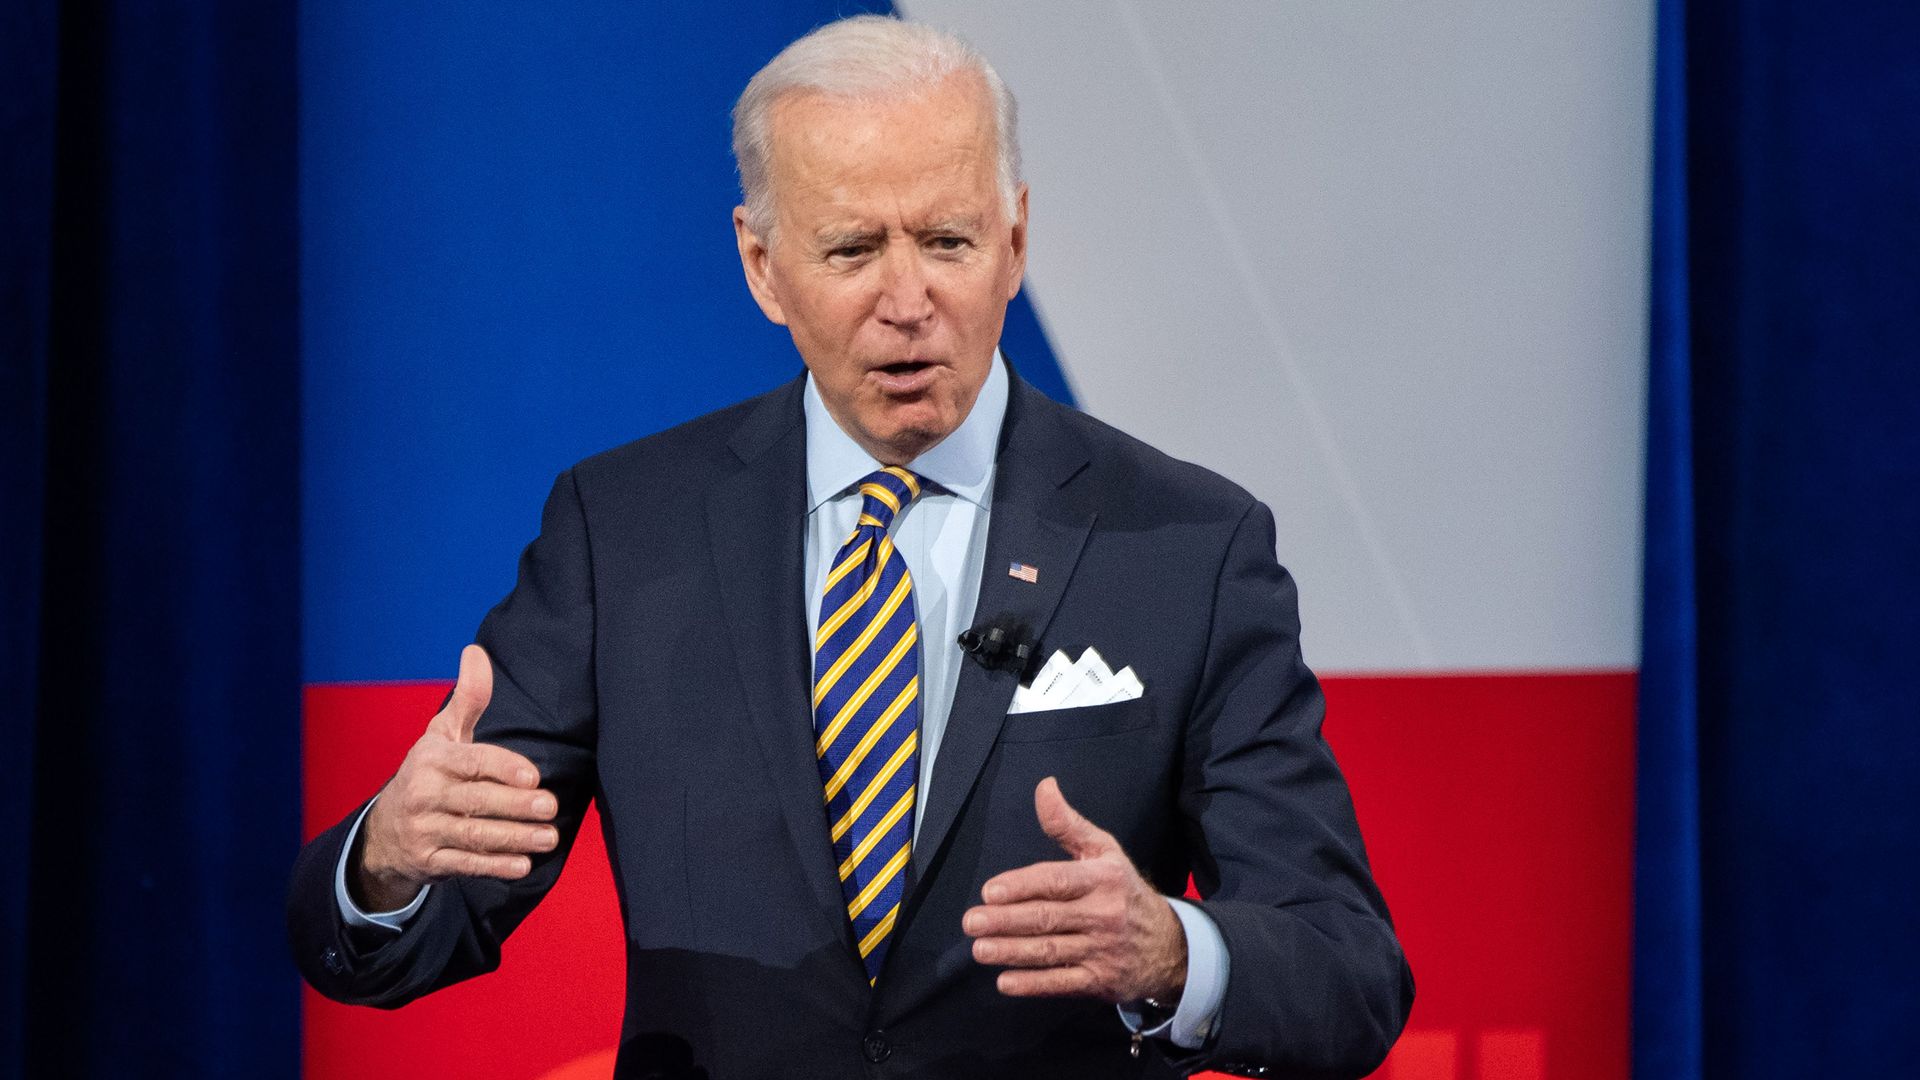 US President Joe Biden participates in a CNN town hall at the Pabst Theater in Milwaukee, Wisconsin, February 16